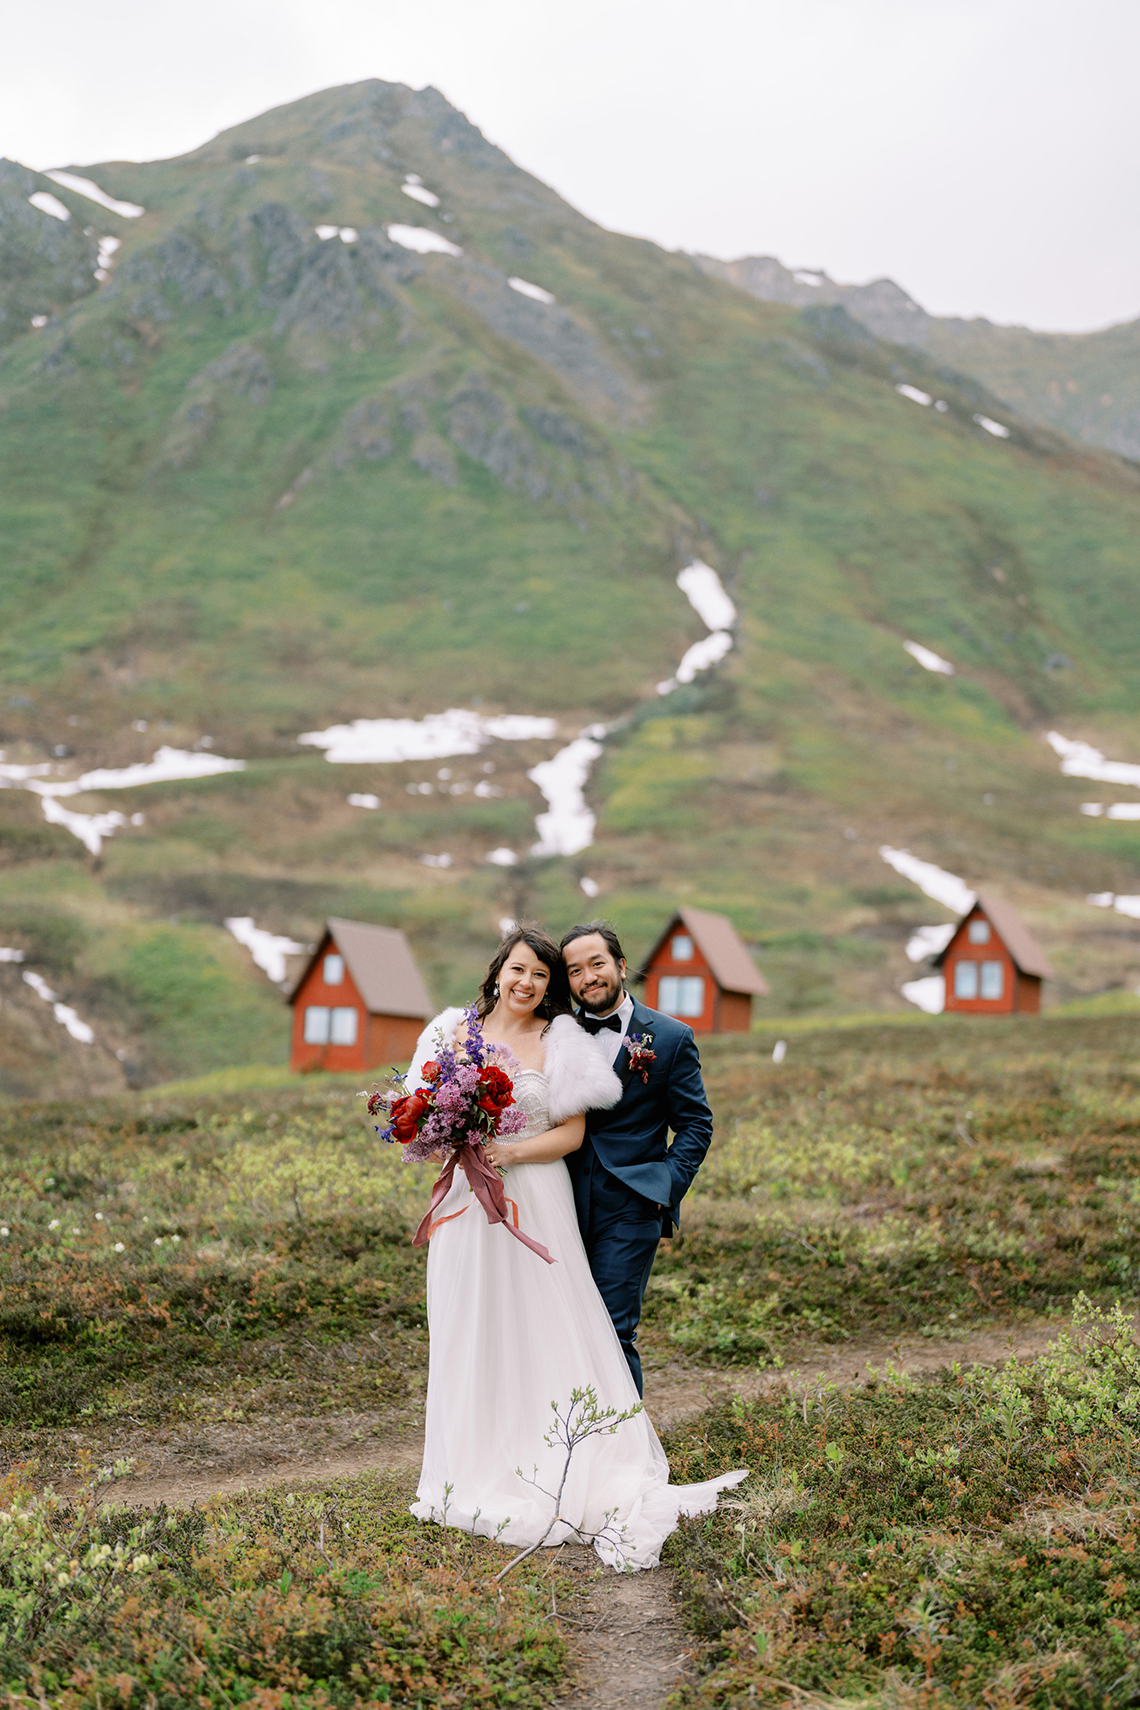 The Most Beautiful Elopement We Have Ever Seen – Hatchers Pass Alaska – Outland Creative – Corinne Graves – Bridal Musings – Elopement Giveaway 39